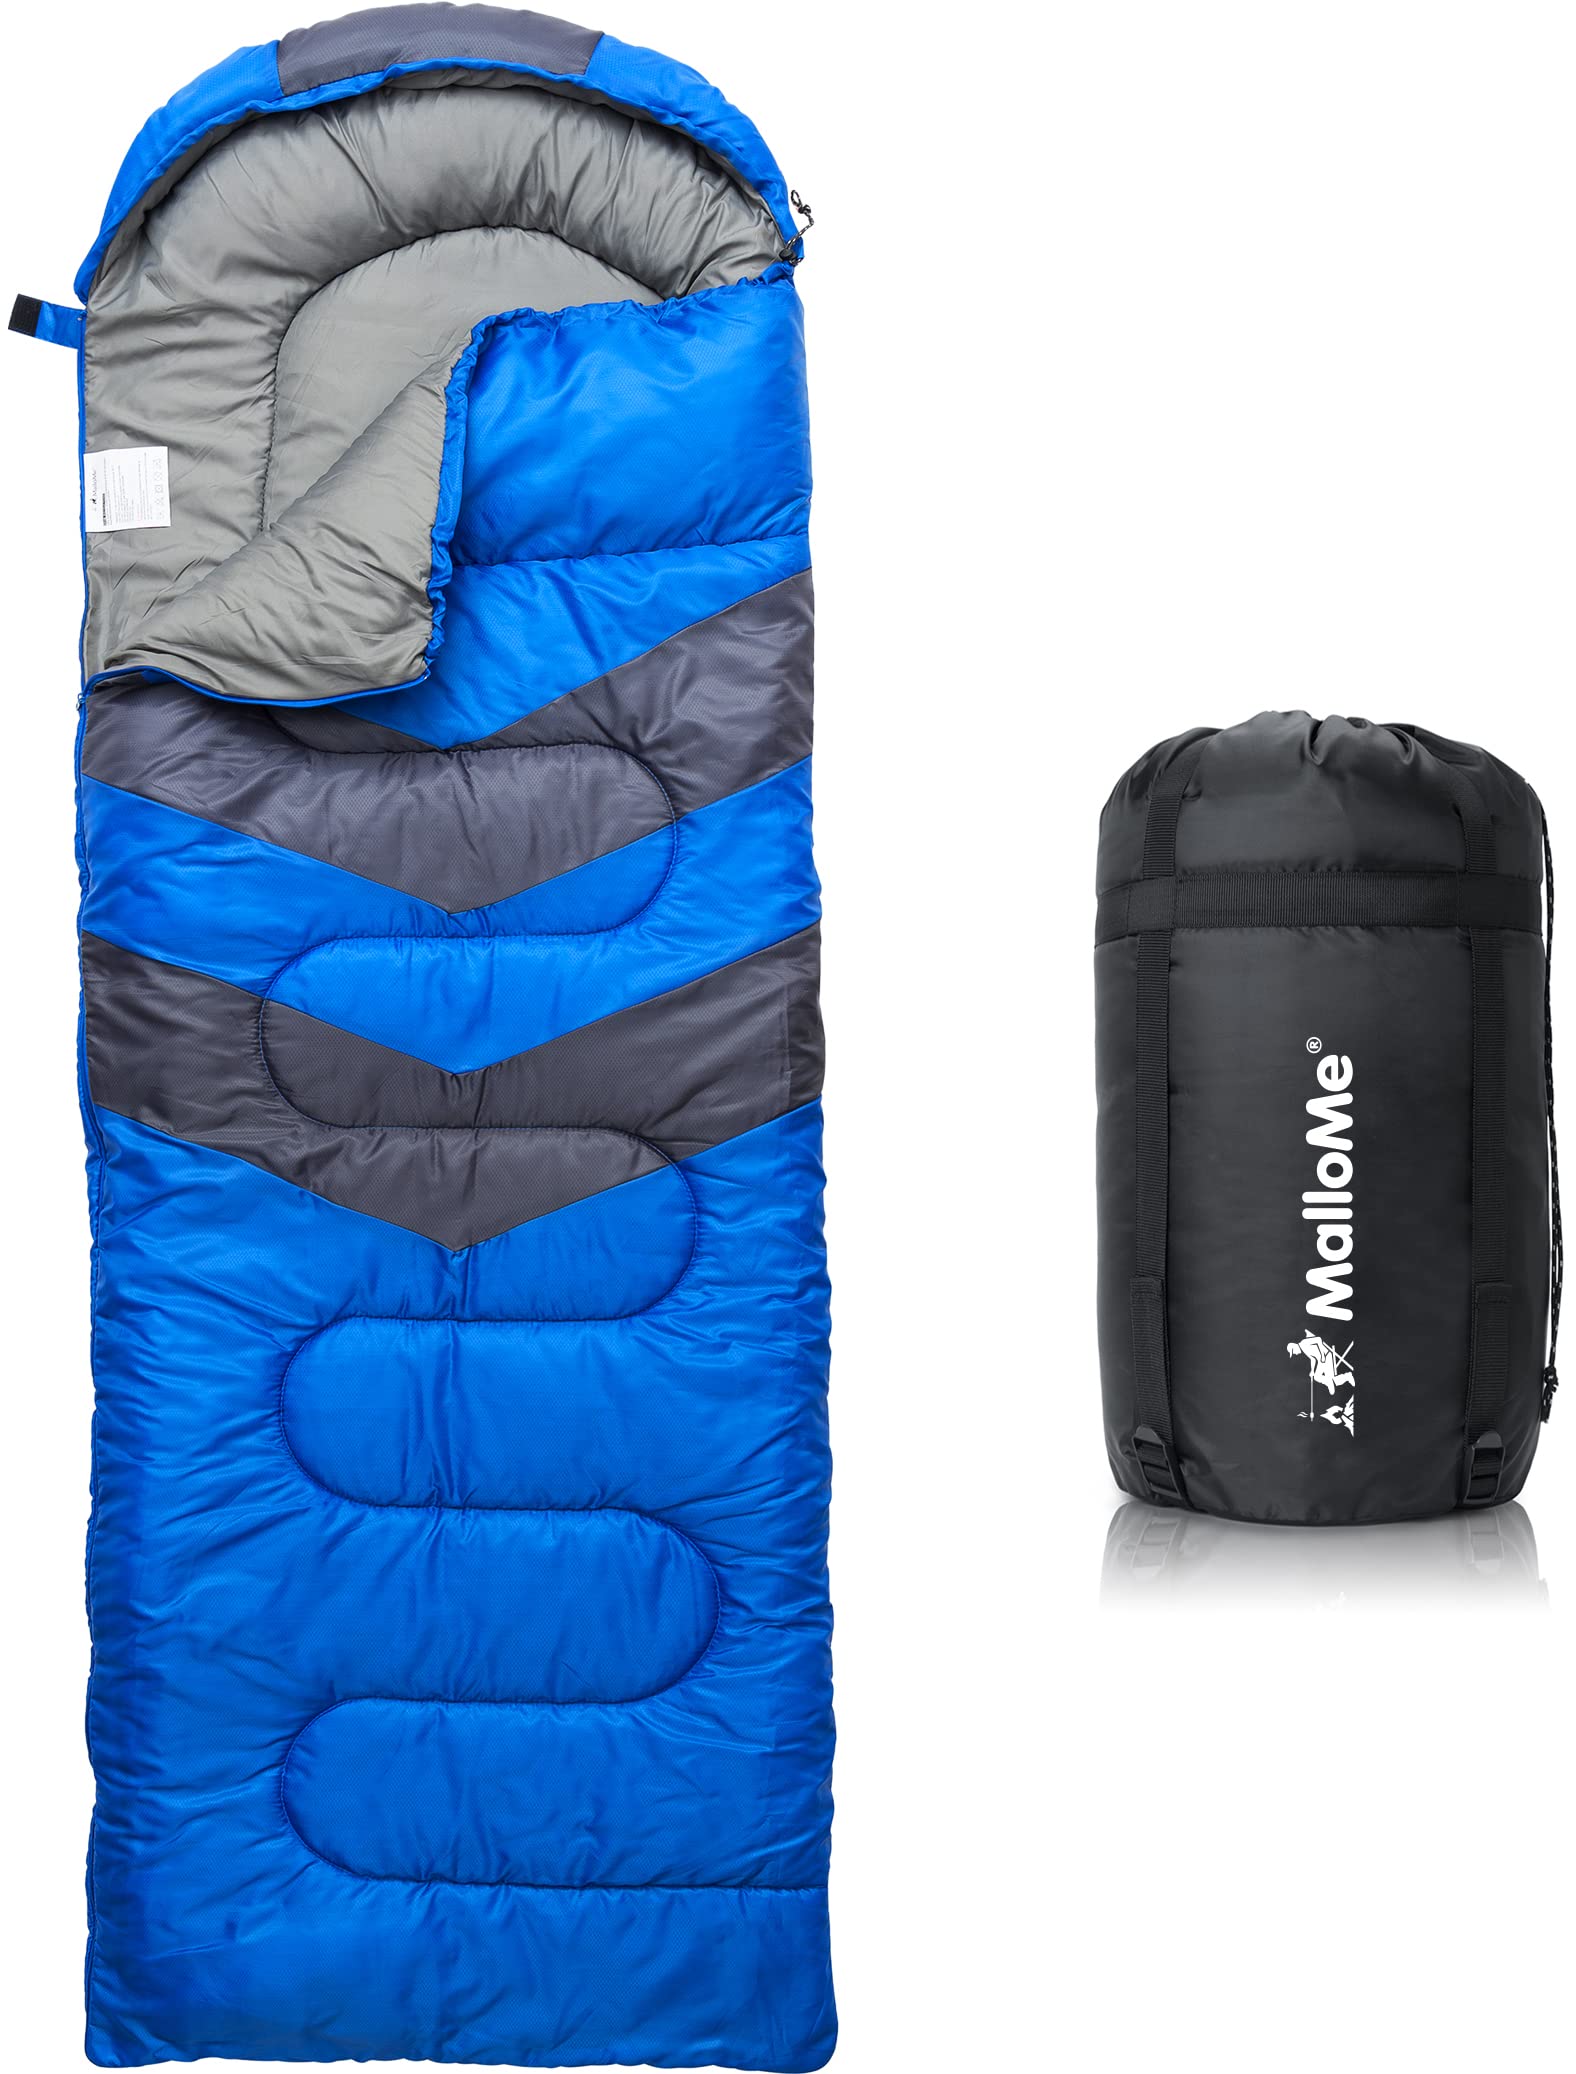 Sleeping Bags for Adults Cold Weather & Warm - Lightweight Compact